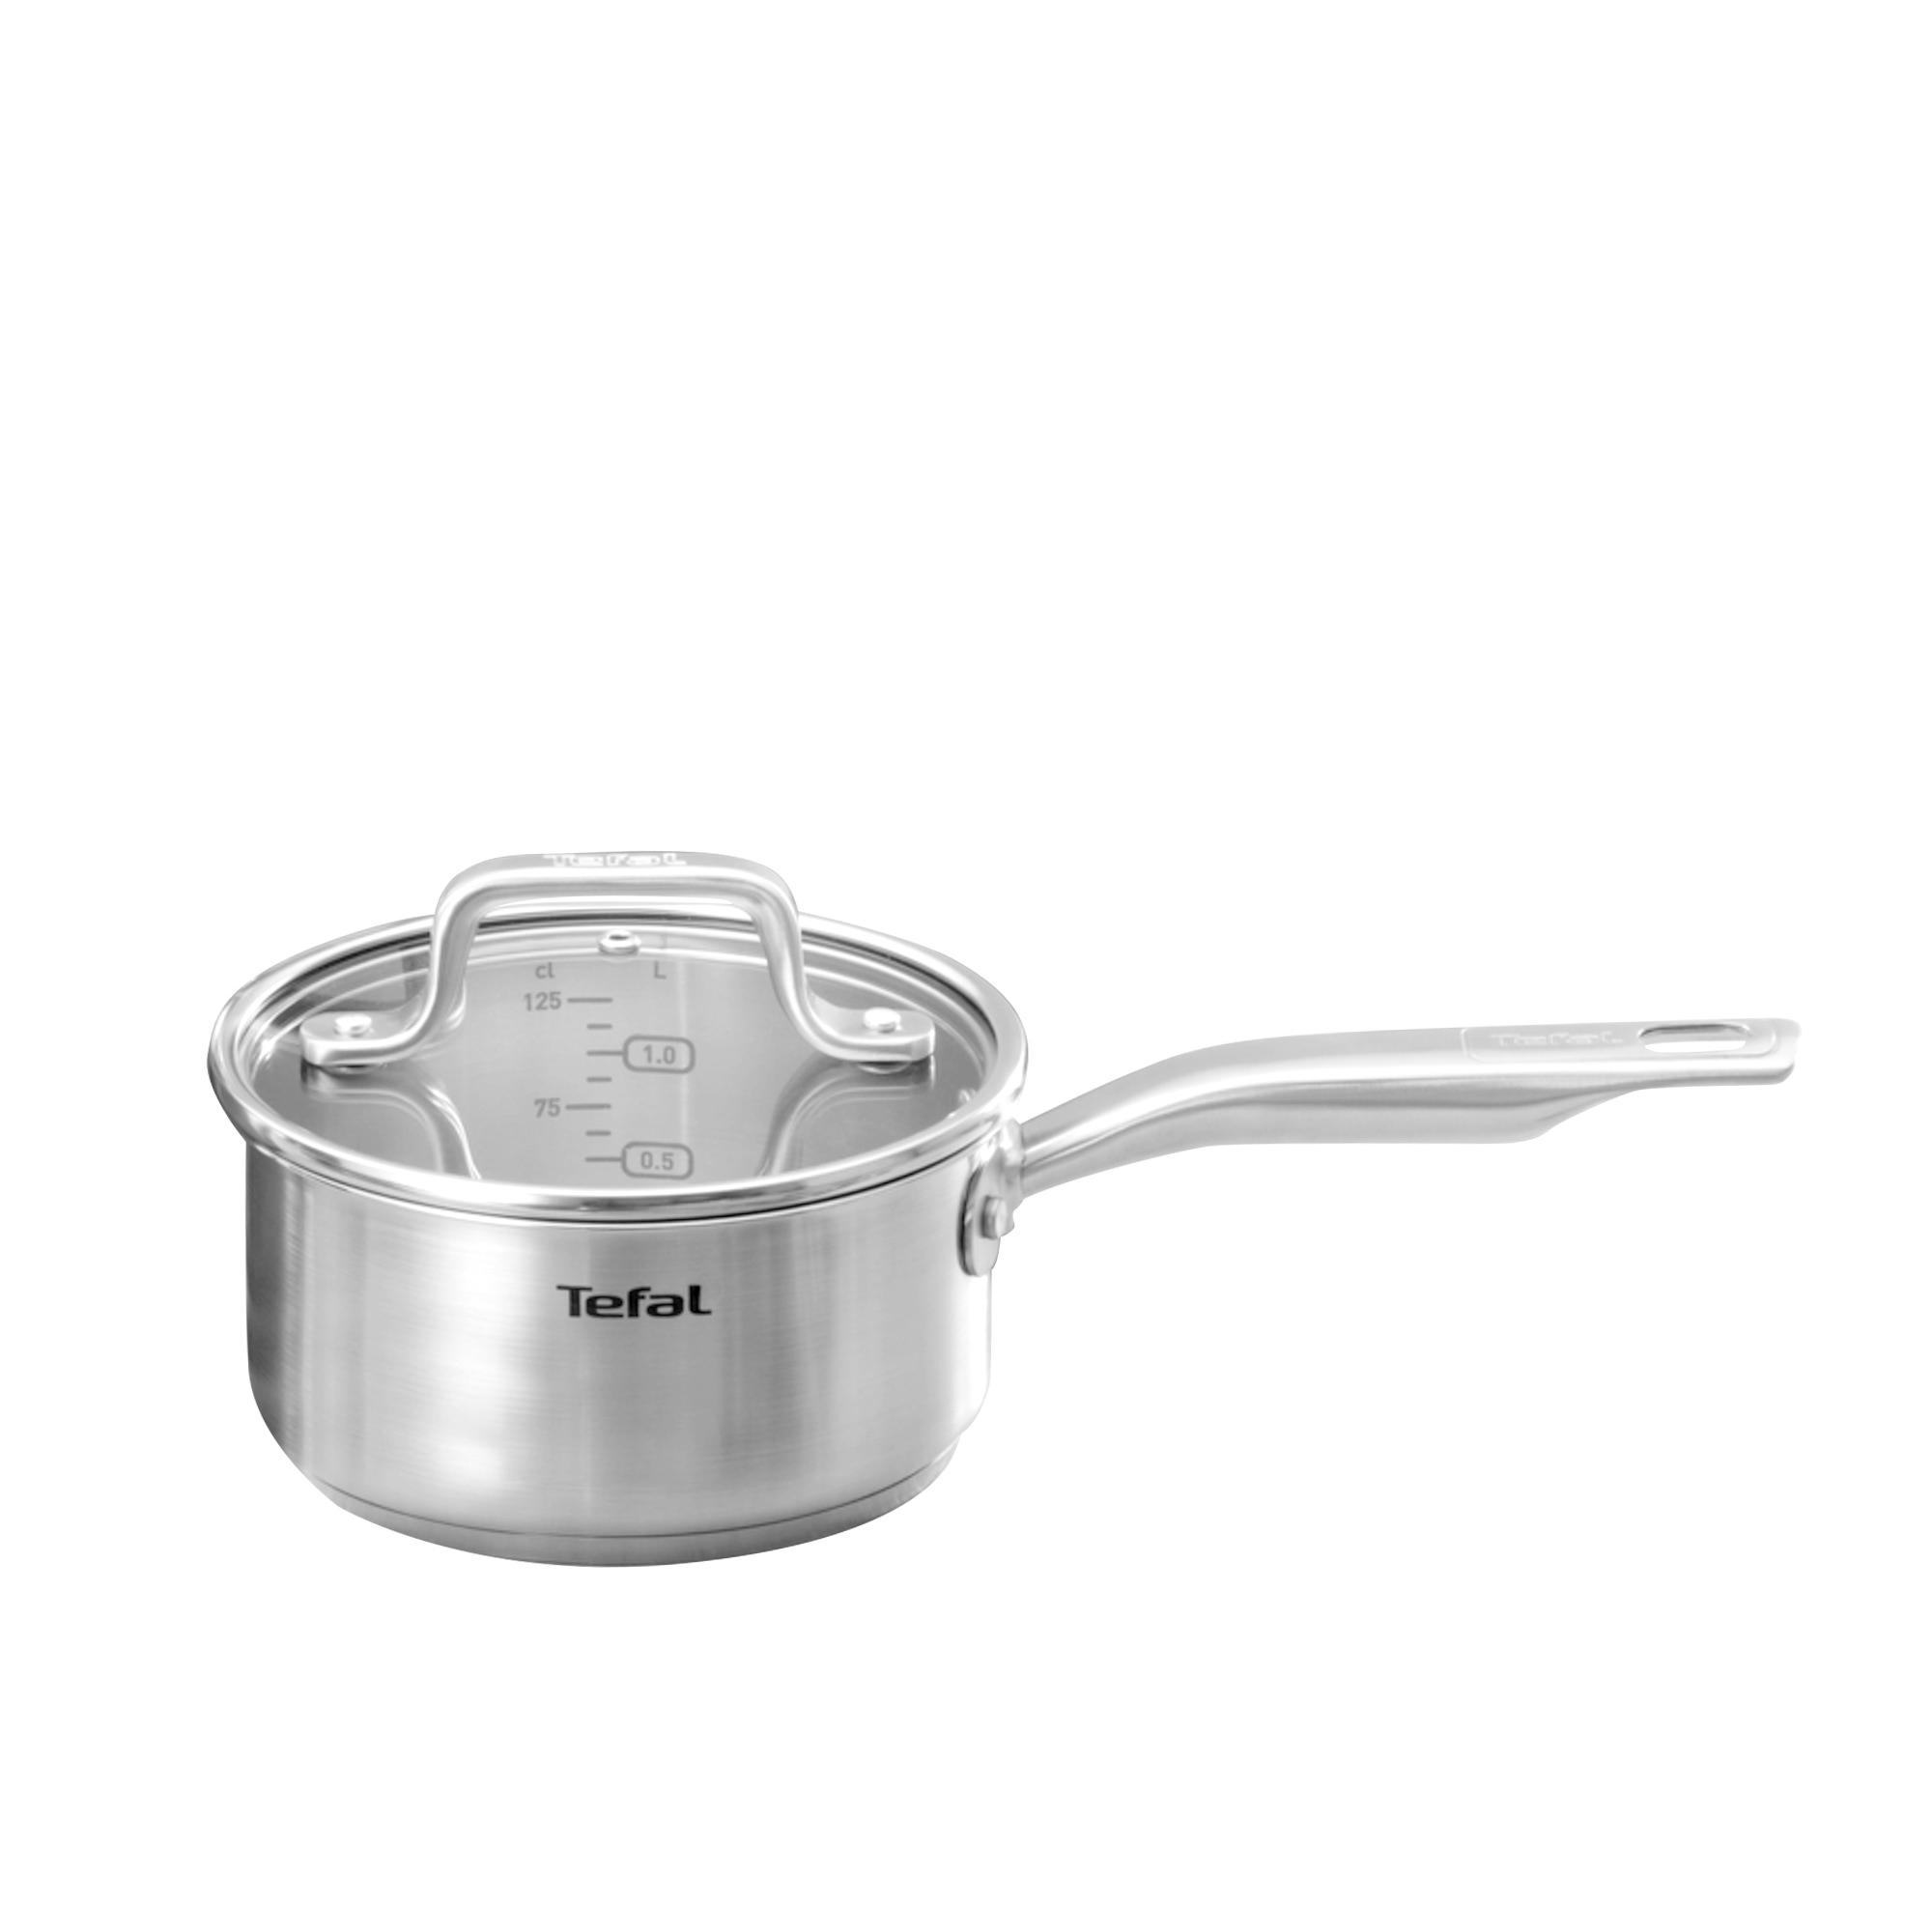 Tefal Virtuoso 4pc Stainless Steel Cookware Set Image 4